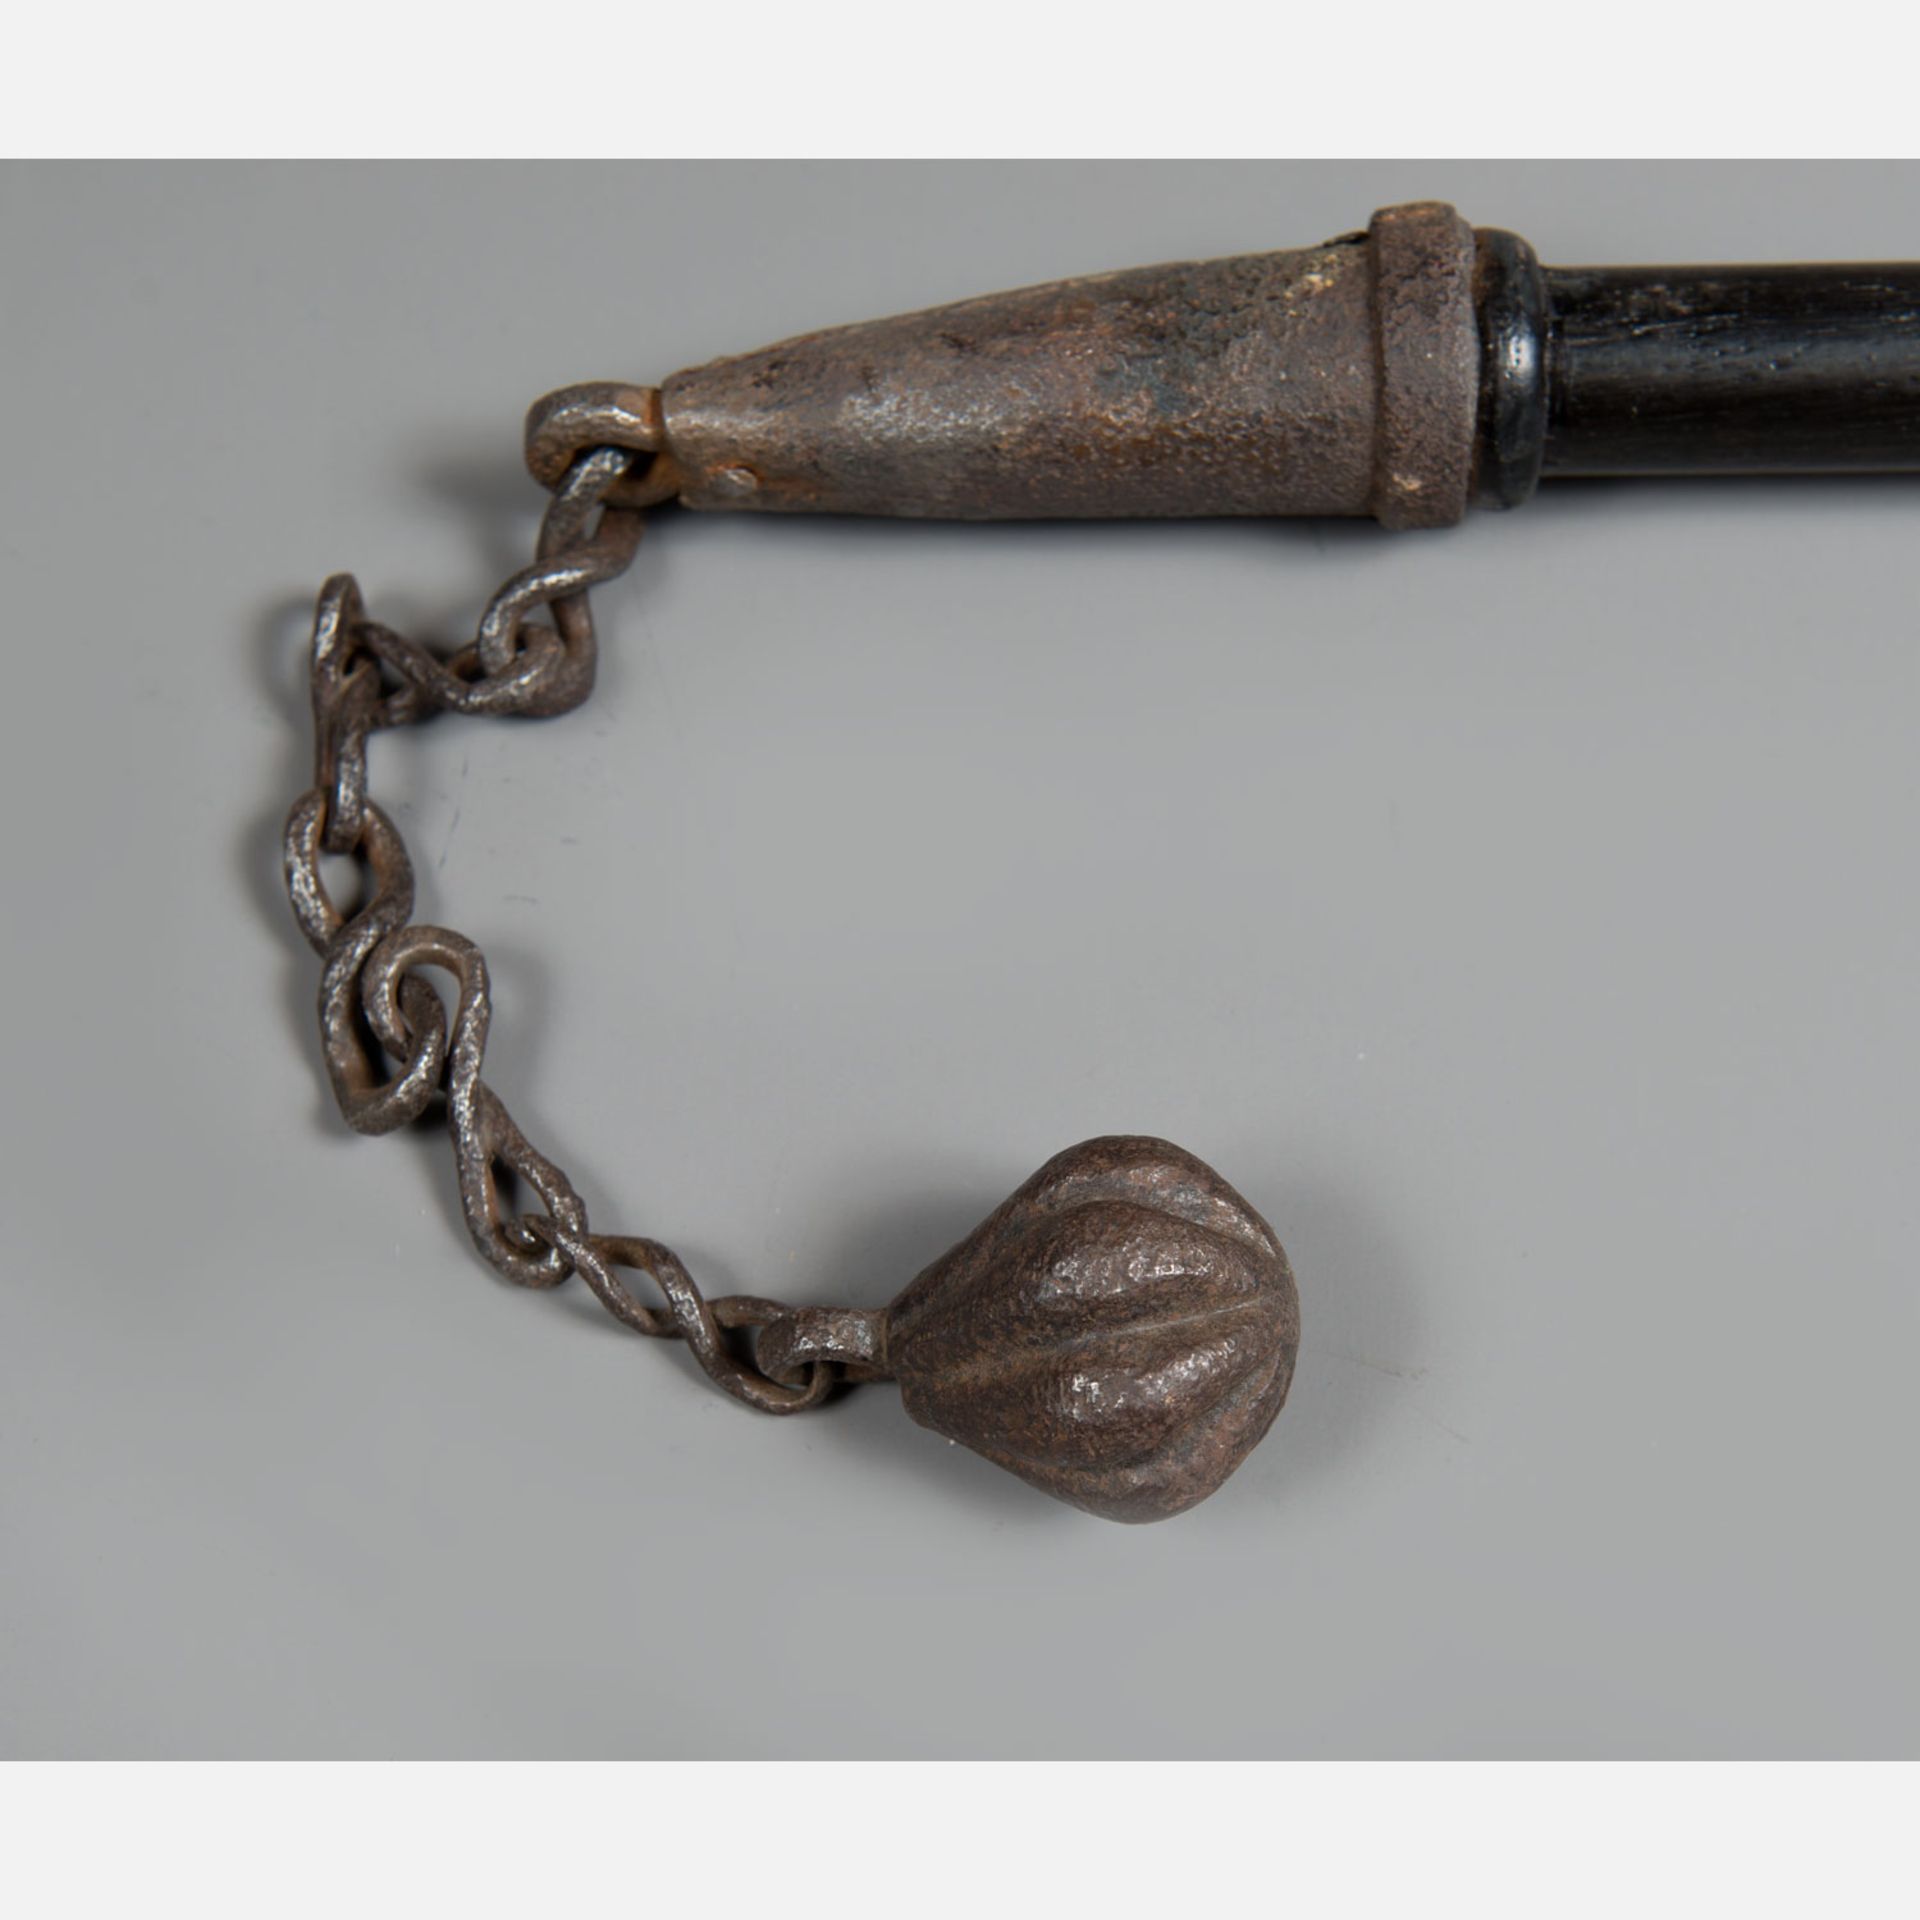 Medieval mace - Image 2 of 2